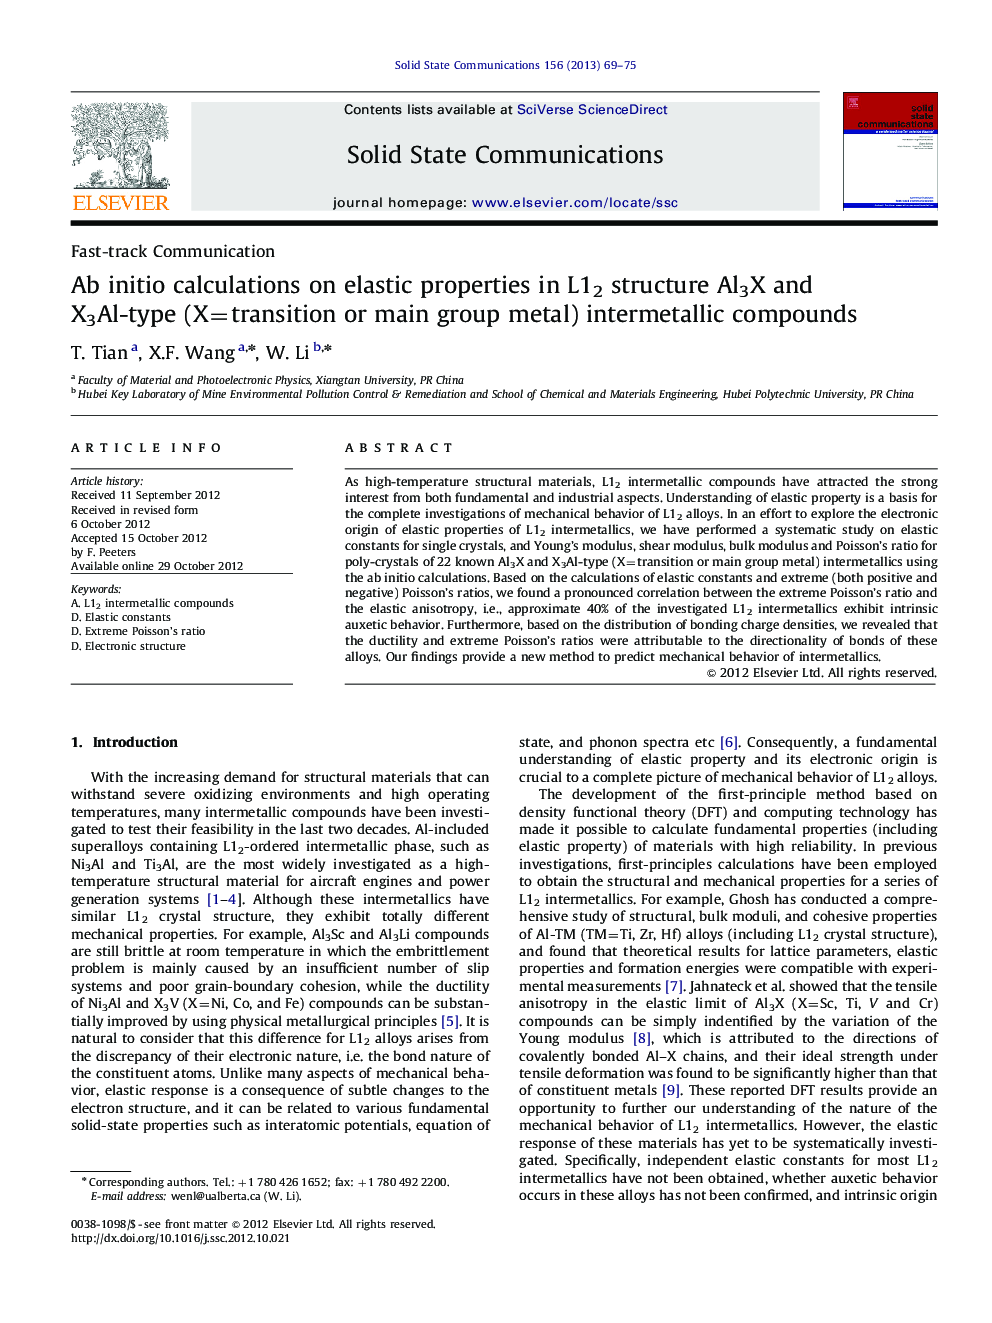 Ab initio calculations on elastic properties in L12 structure Al3X and X3Al-type (X=transition or main group metal) intermetallic compounds